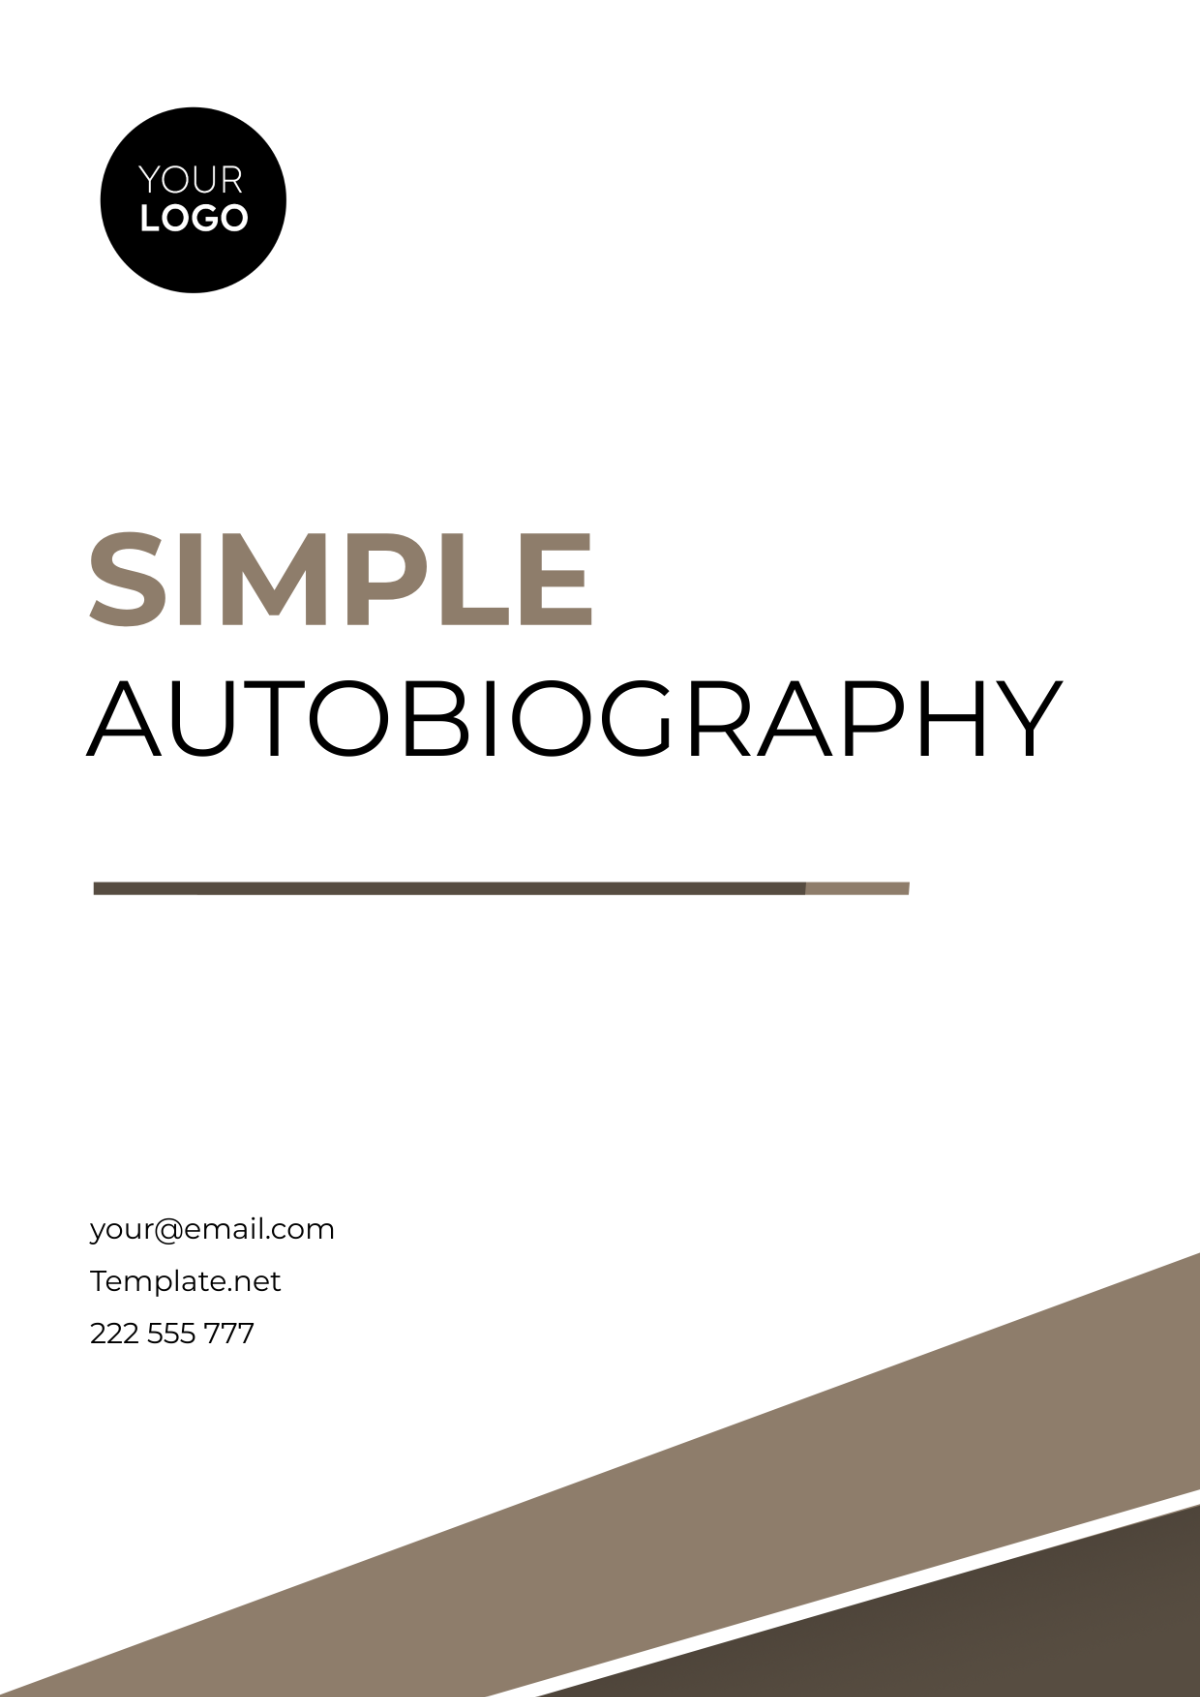 Simple Autobiography Template